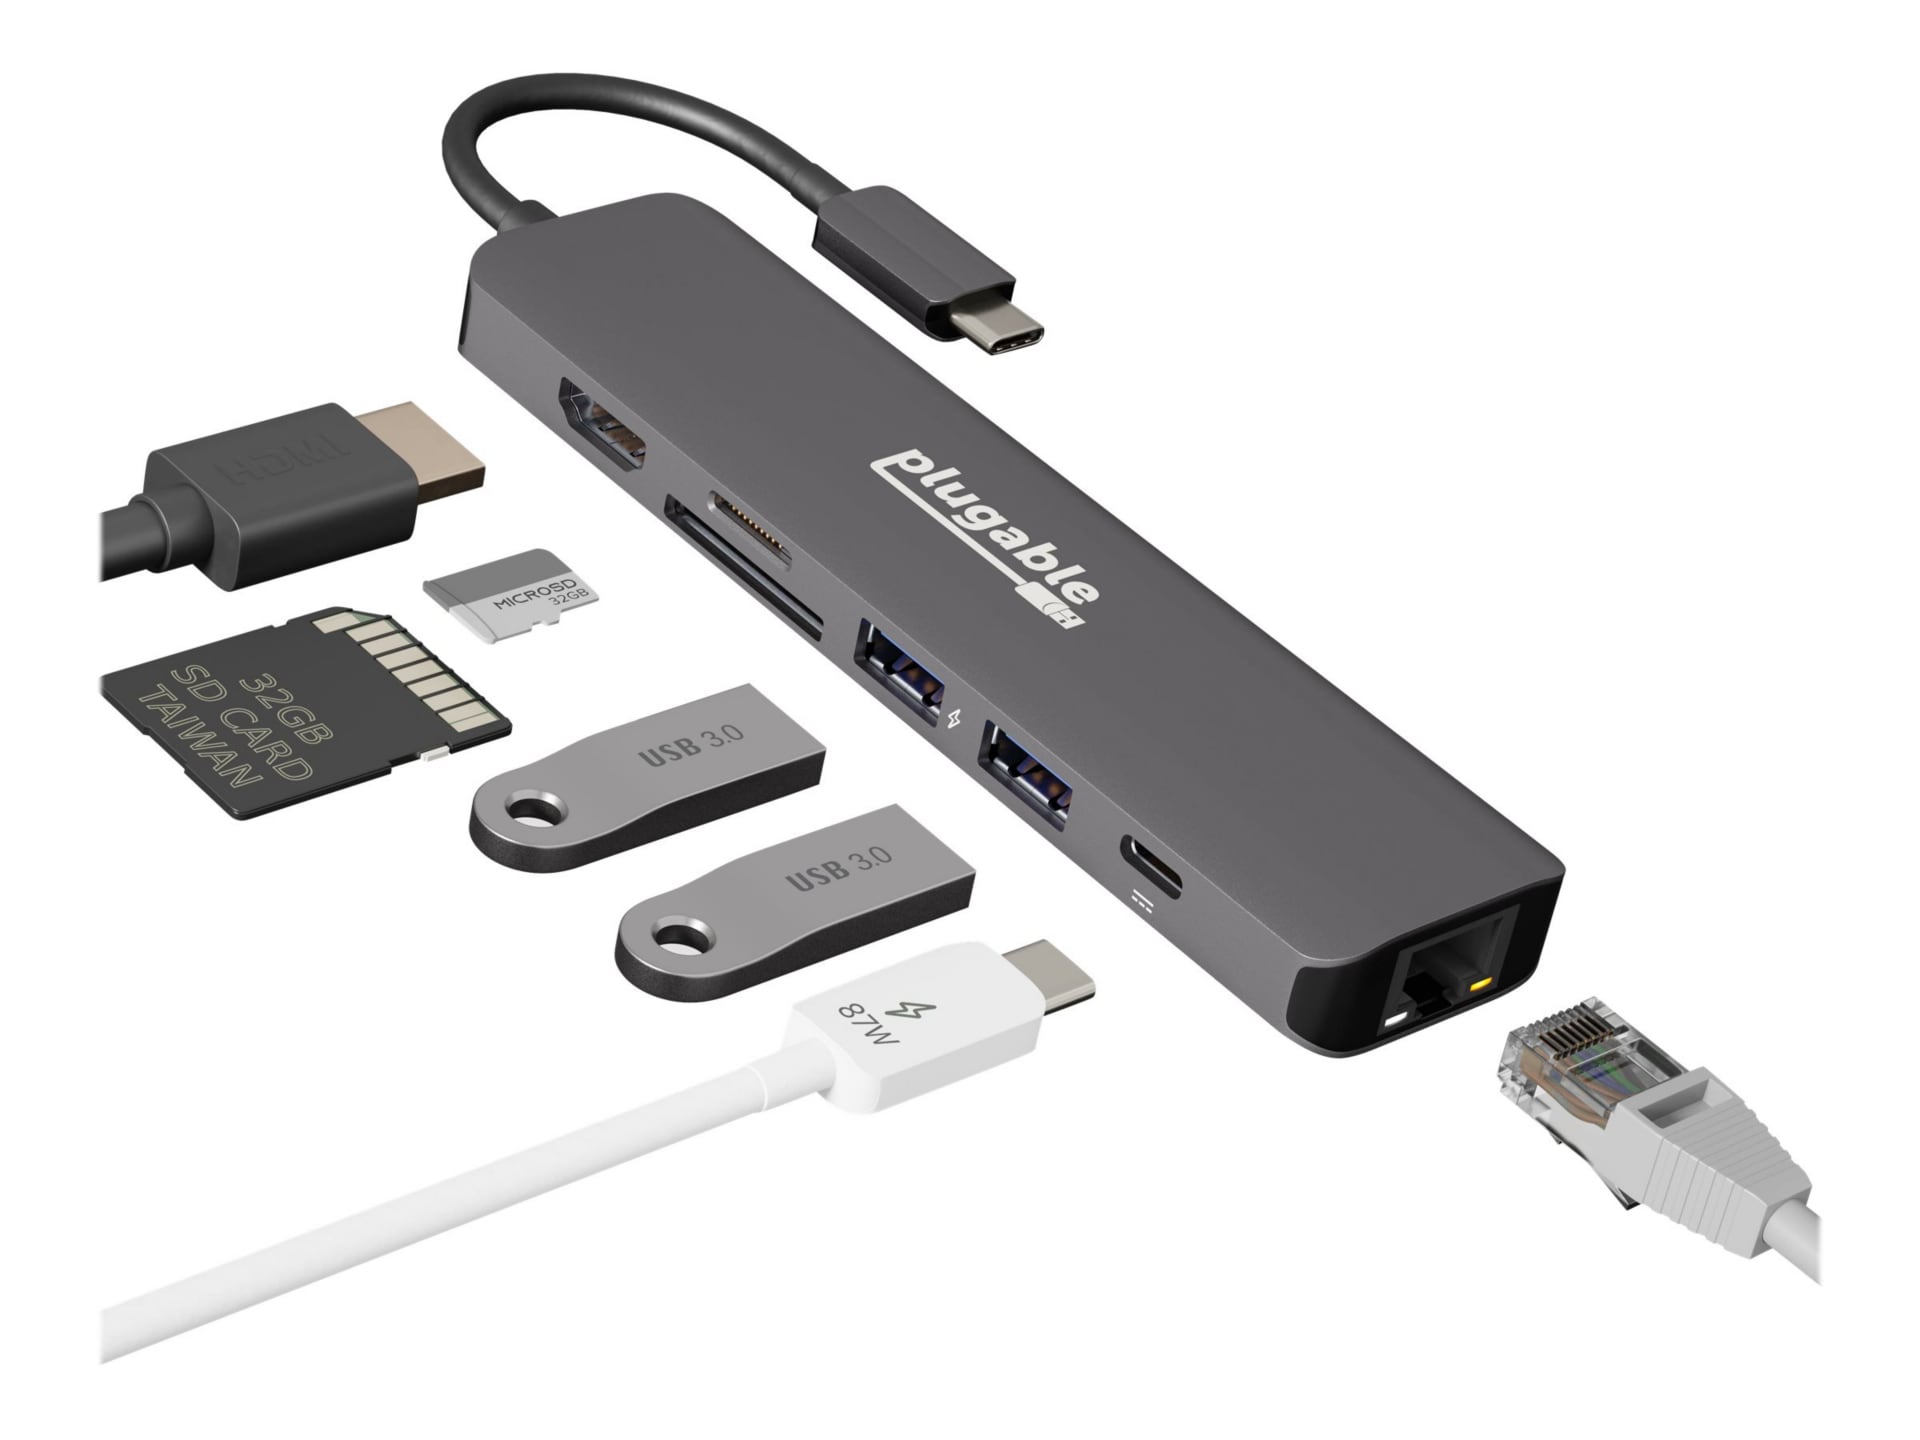 USB-C® to Ethernet Adapter with 3-Port USB Hub - Black, USB Hubs and Cards, USB Cables, Adapters, and Hubs